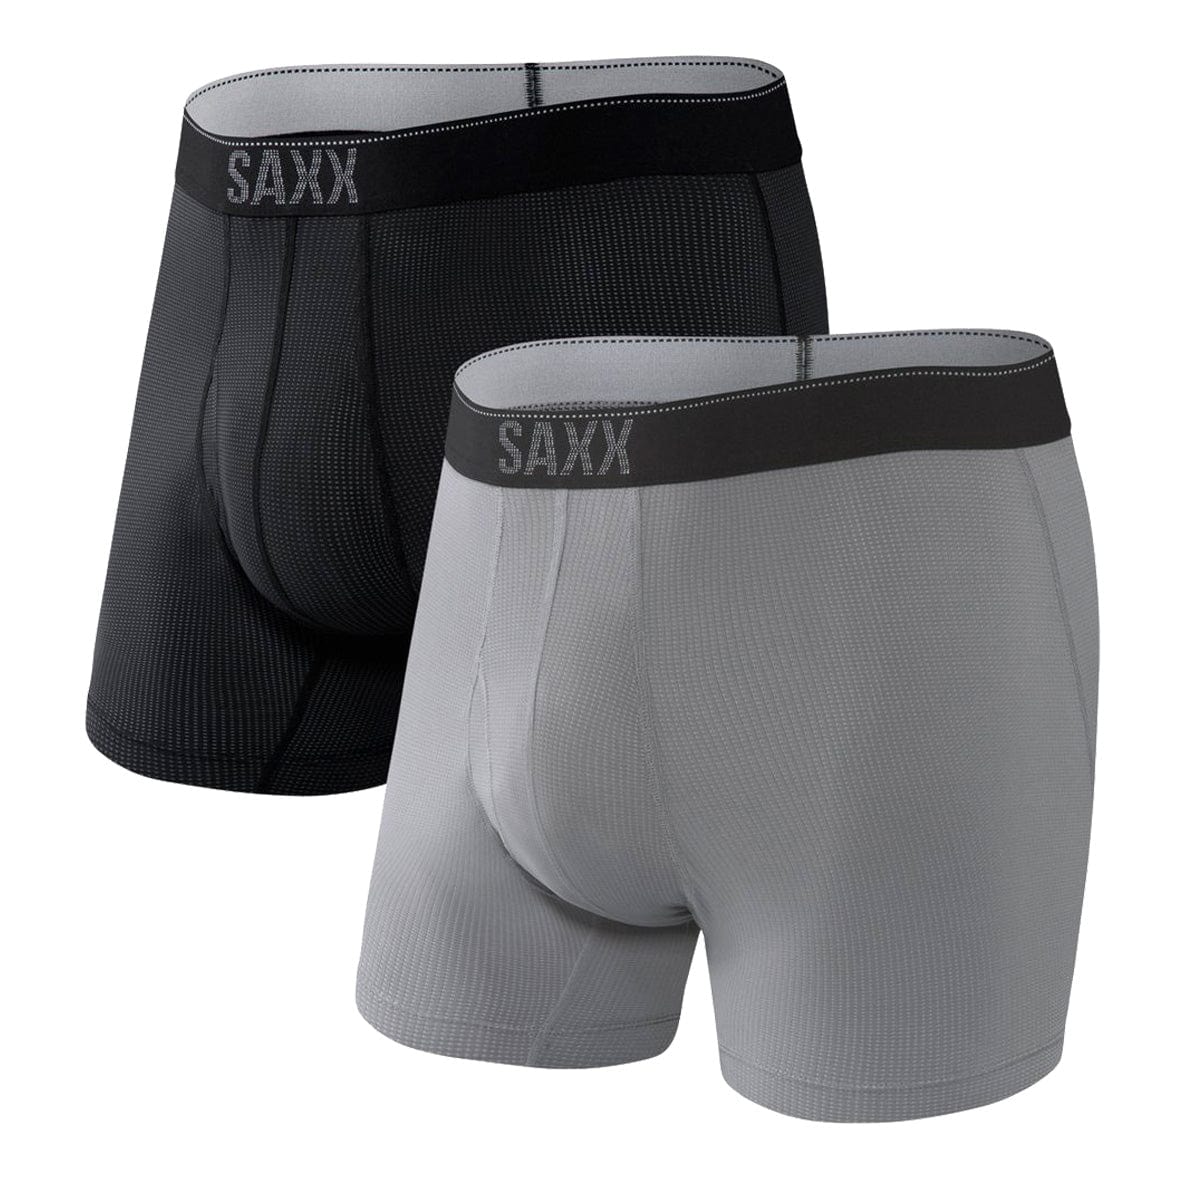 Saxx Quest Boxers - Black / Dark Charcoal (2 Pack) - The Hockey Shop Source For Sports